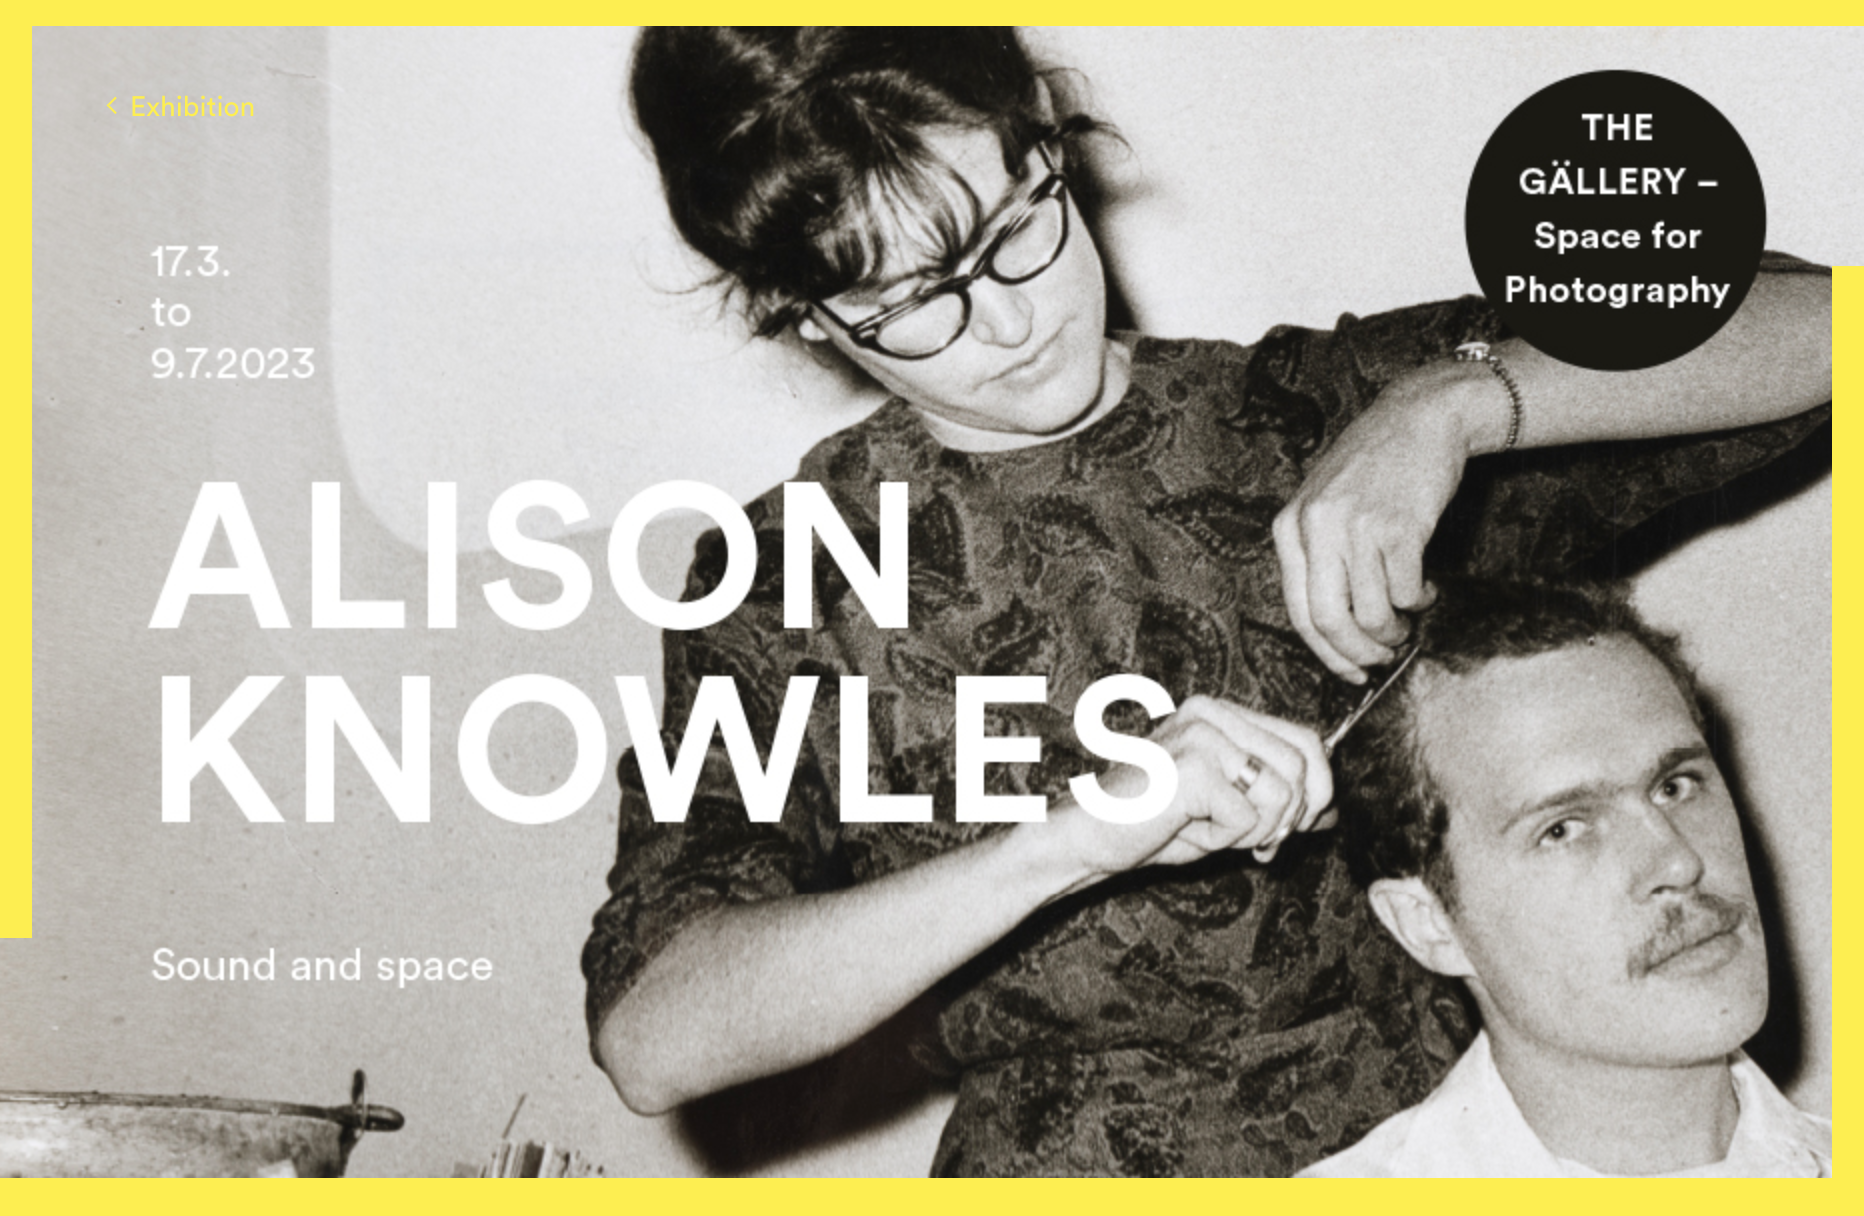 Website screen shot showing the exhibition poster, a black and white picture of Alison cutting a mans hair. exhibition details are overlaid in text